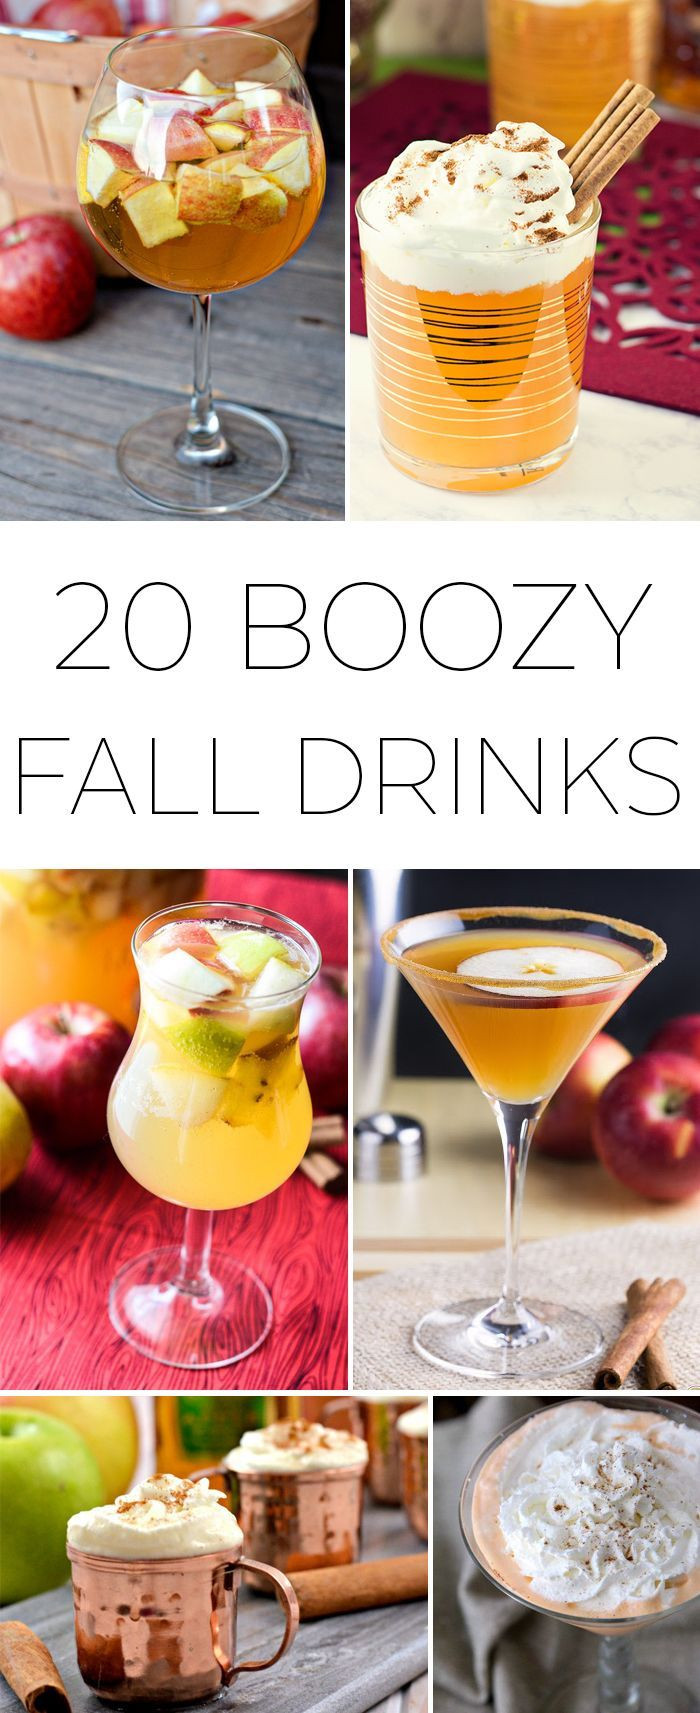 Thanksgiving Drinks Alcoholic
 104 best Holidays Thanksgiving and Fall images on